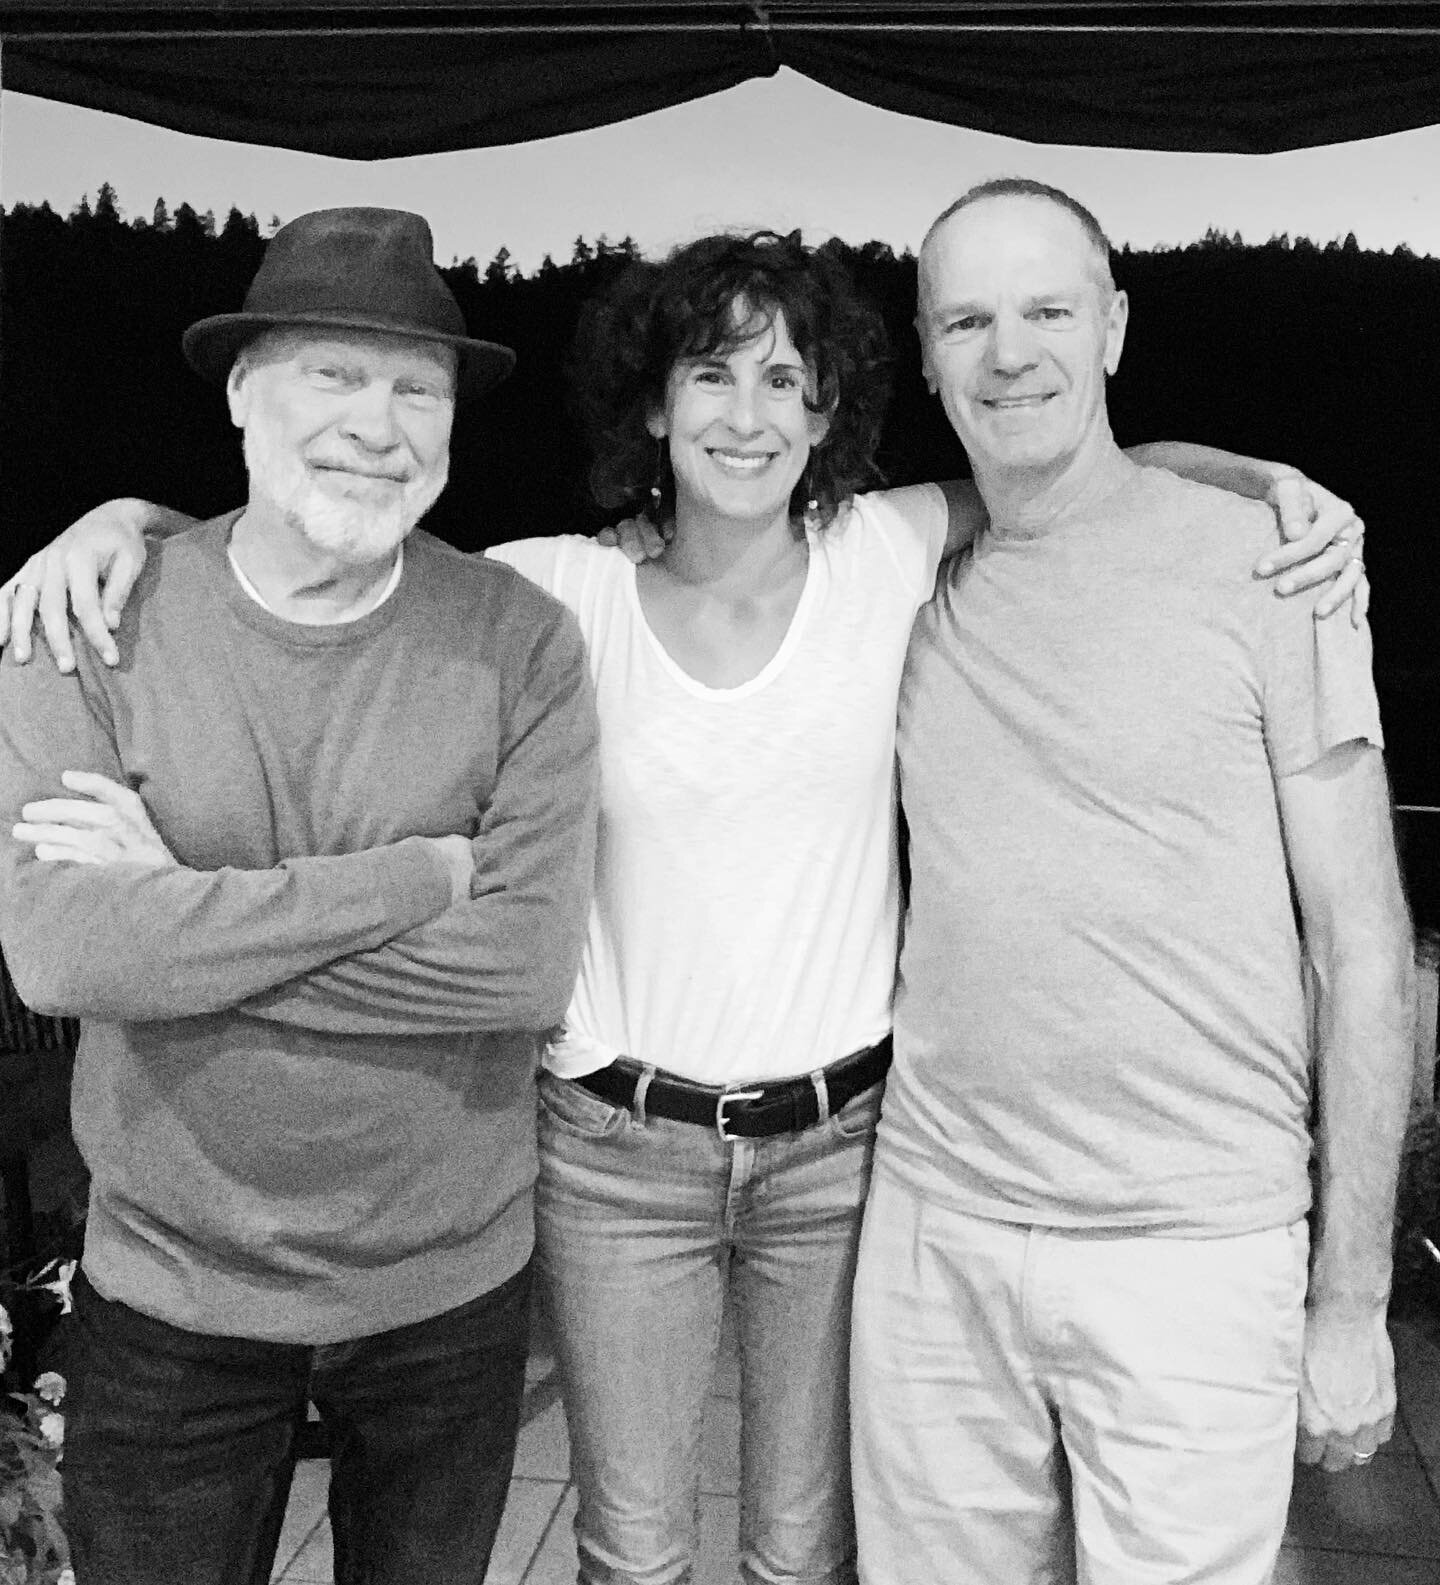 I marvel that Dave &amp; Stan have been performing music for 50 years! Feeling so grateful for their expertise, talent, &amp; steadfastness. Feeling so grateful, too, for all of the love you guys gave us. Thanks so much for coming to our show. We had